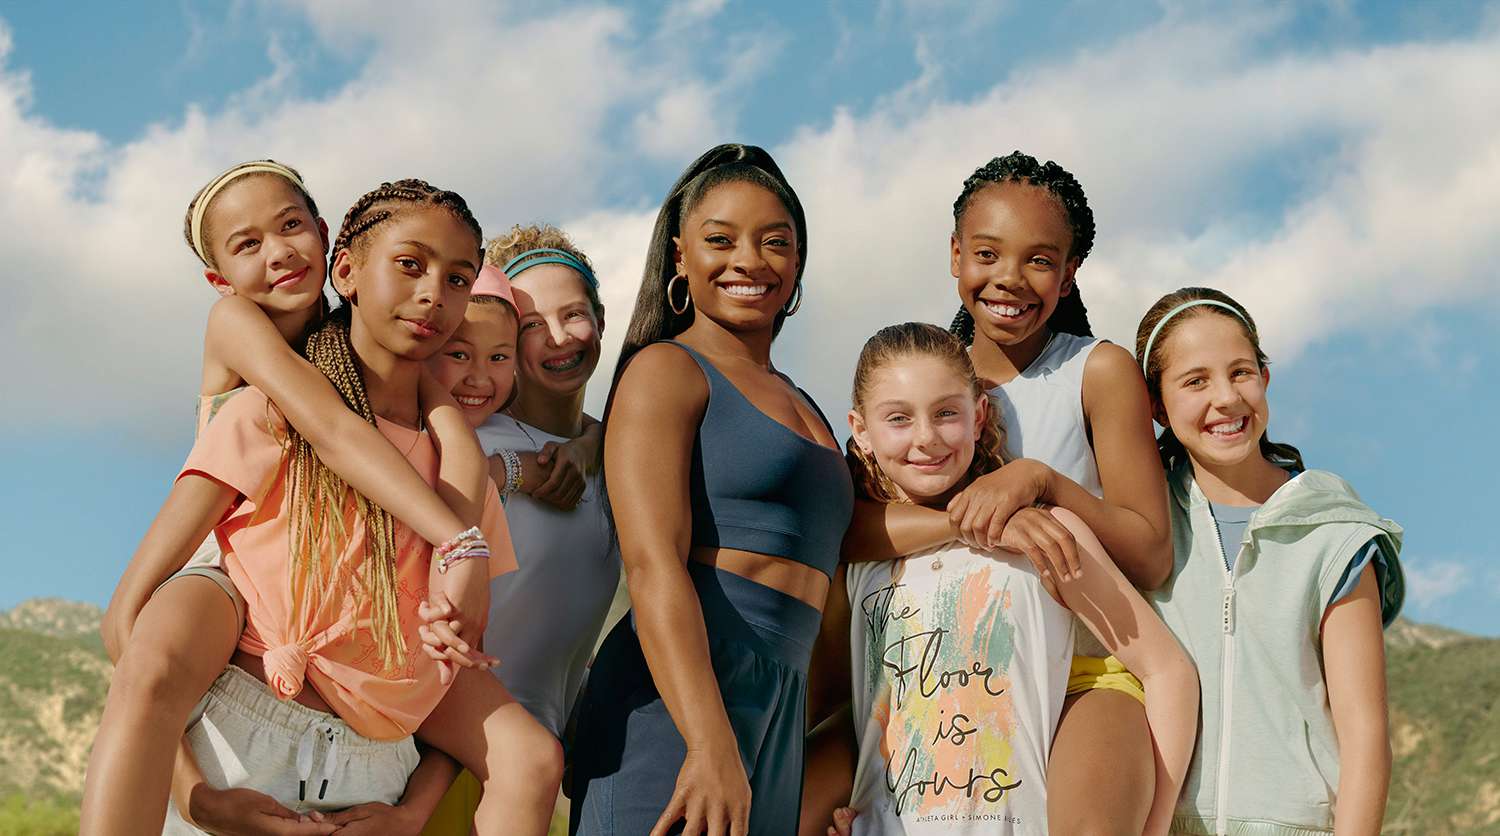 Simone Biles’ New Athleta Line Has Built-In Reminders for Young Girls That ‘No Dream Is Too Big’